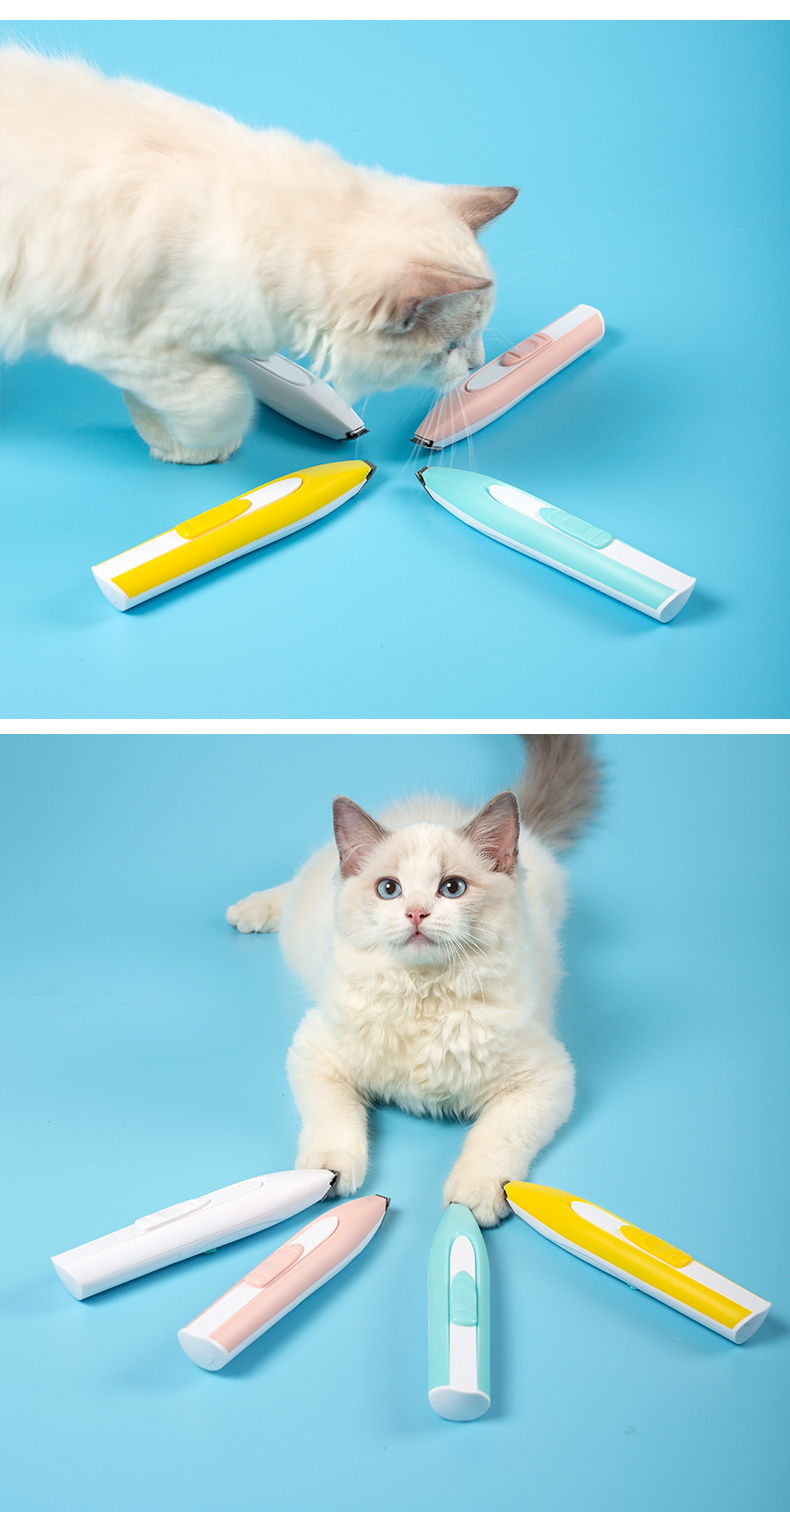 Unibono Yp-7025 Ni-MH Battery Cats Dogs Hair Clipper for Small Dogs Cats Pets